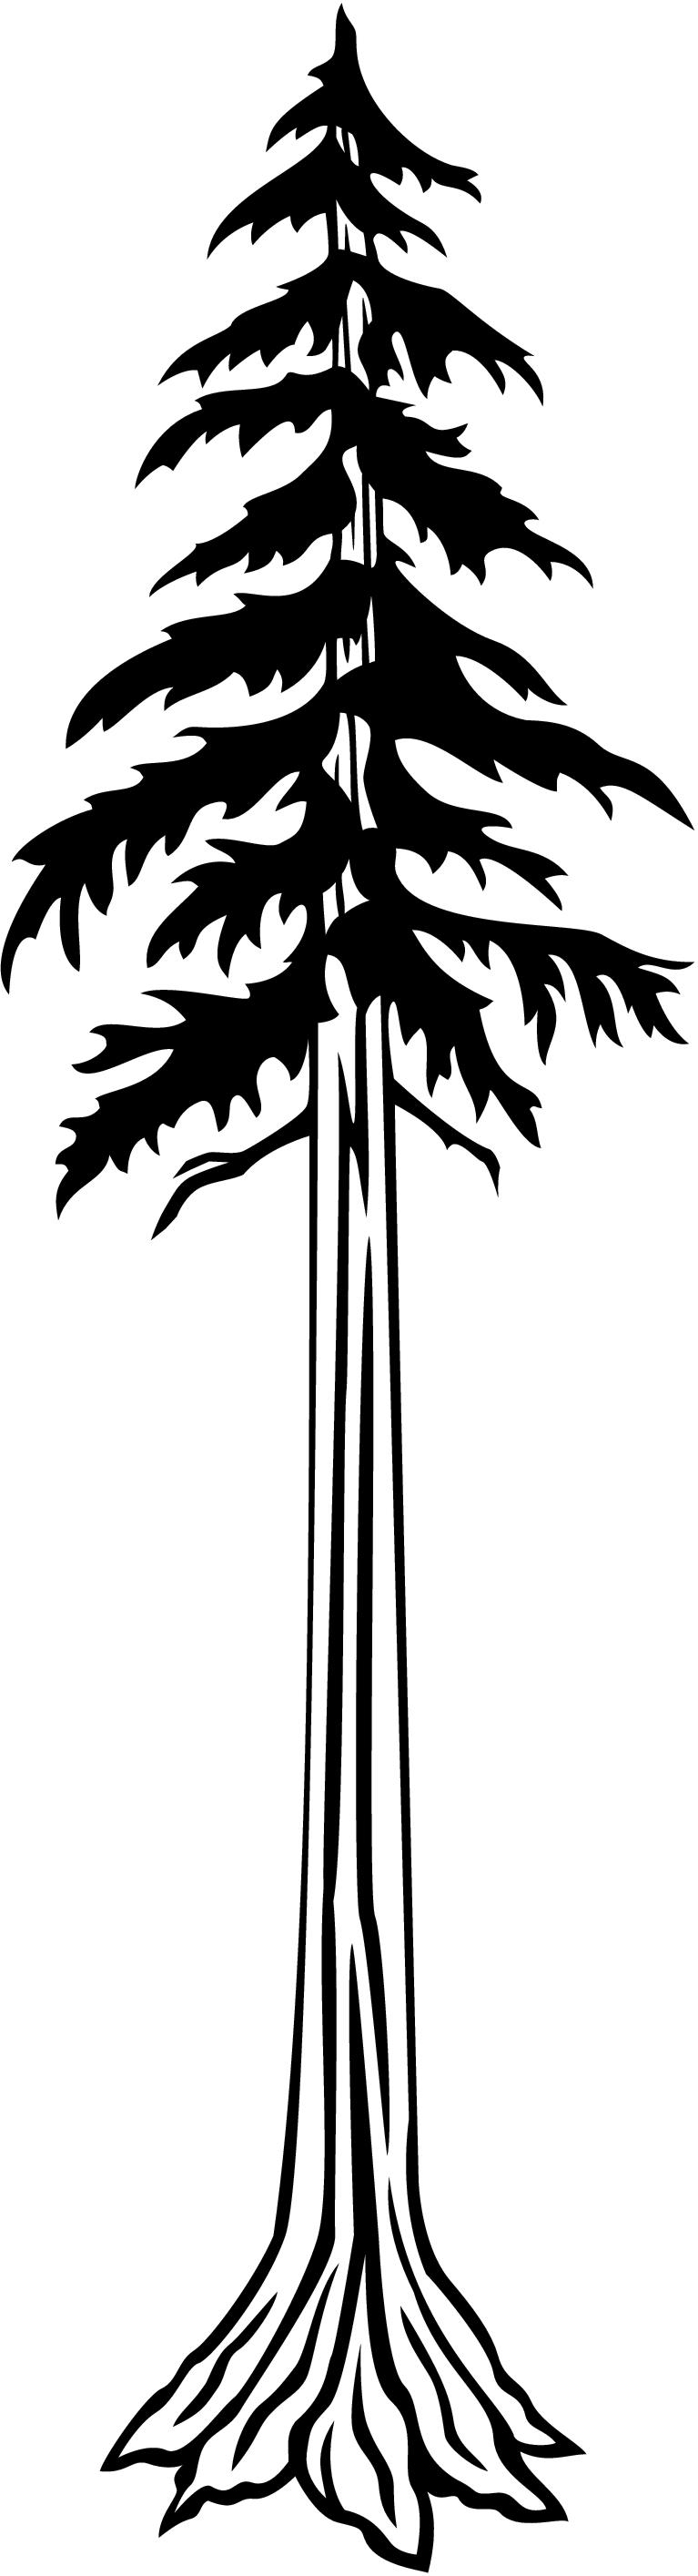 About-; Tree In A Circle Large clip art ...